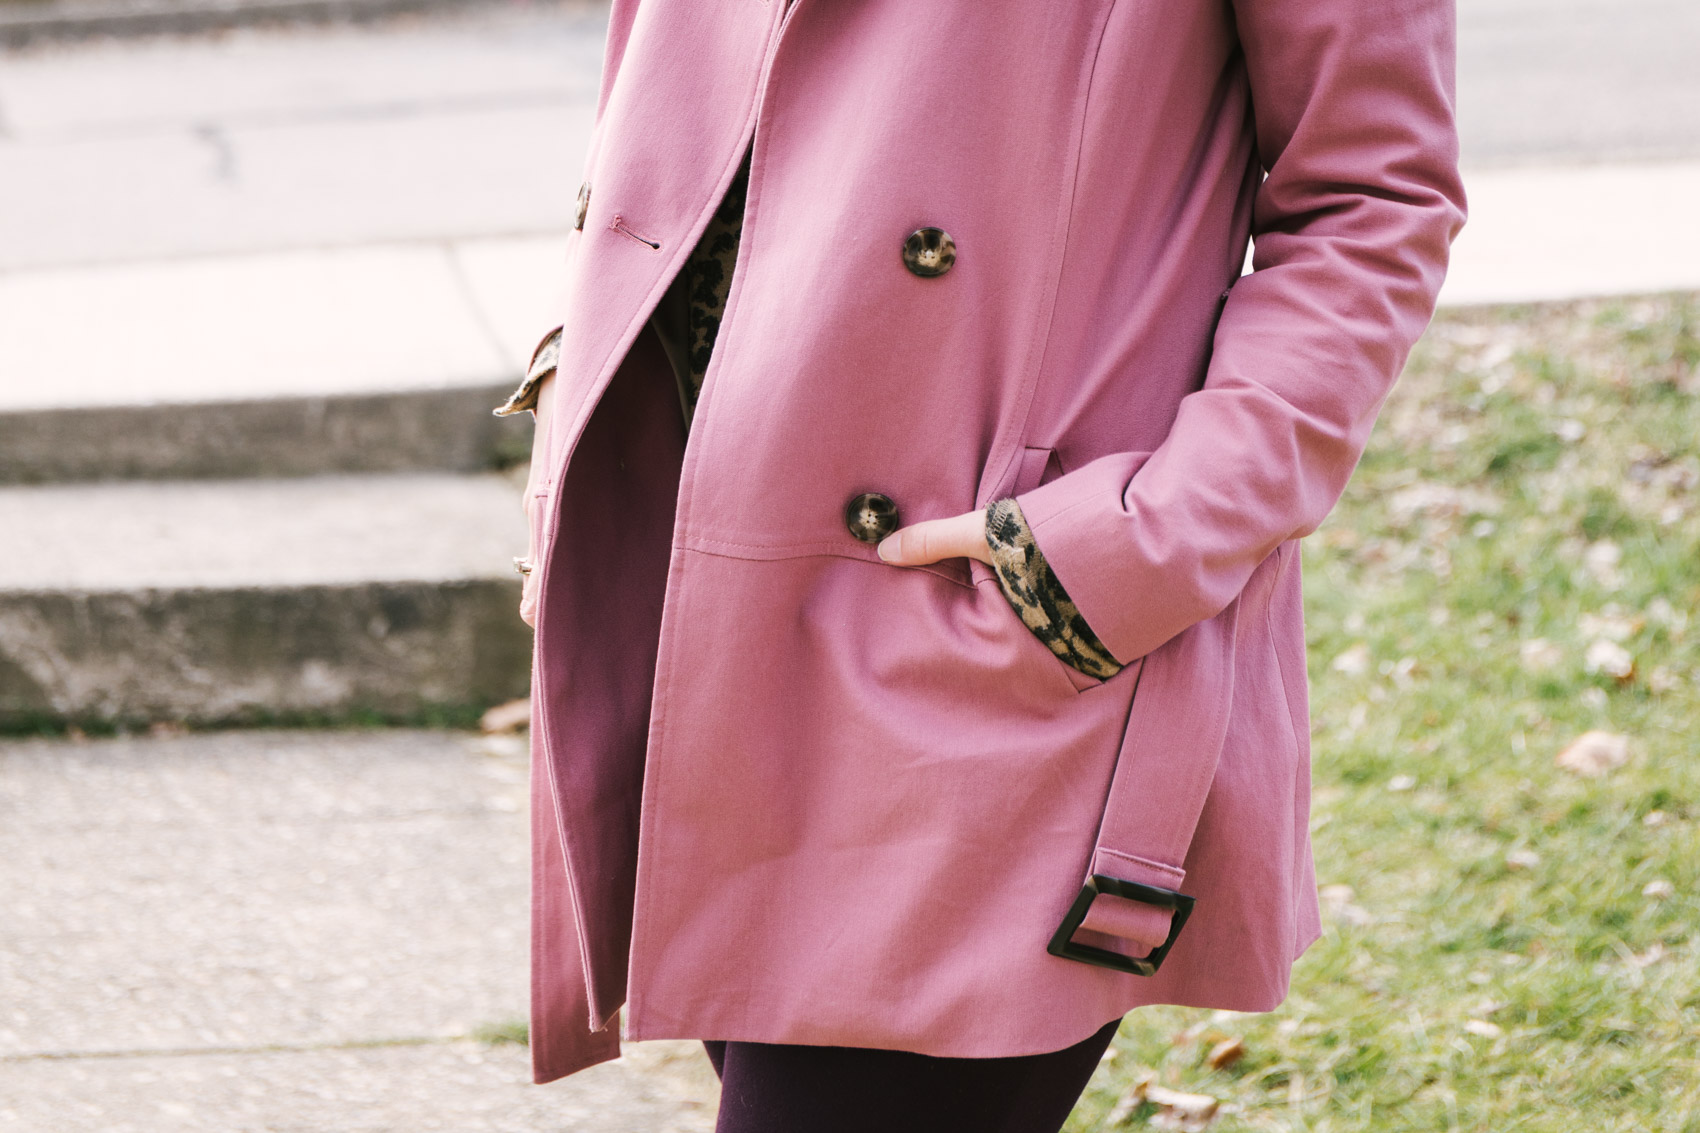 Inspiration and images for styling a women's pink trench coat outfit on chillier days. This dusty pink short trench coat is perfect for spring!